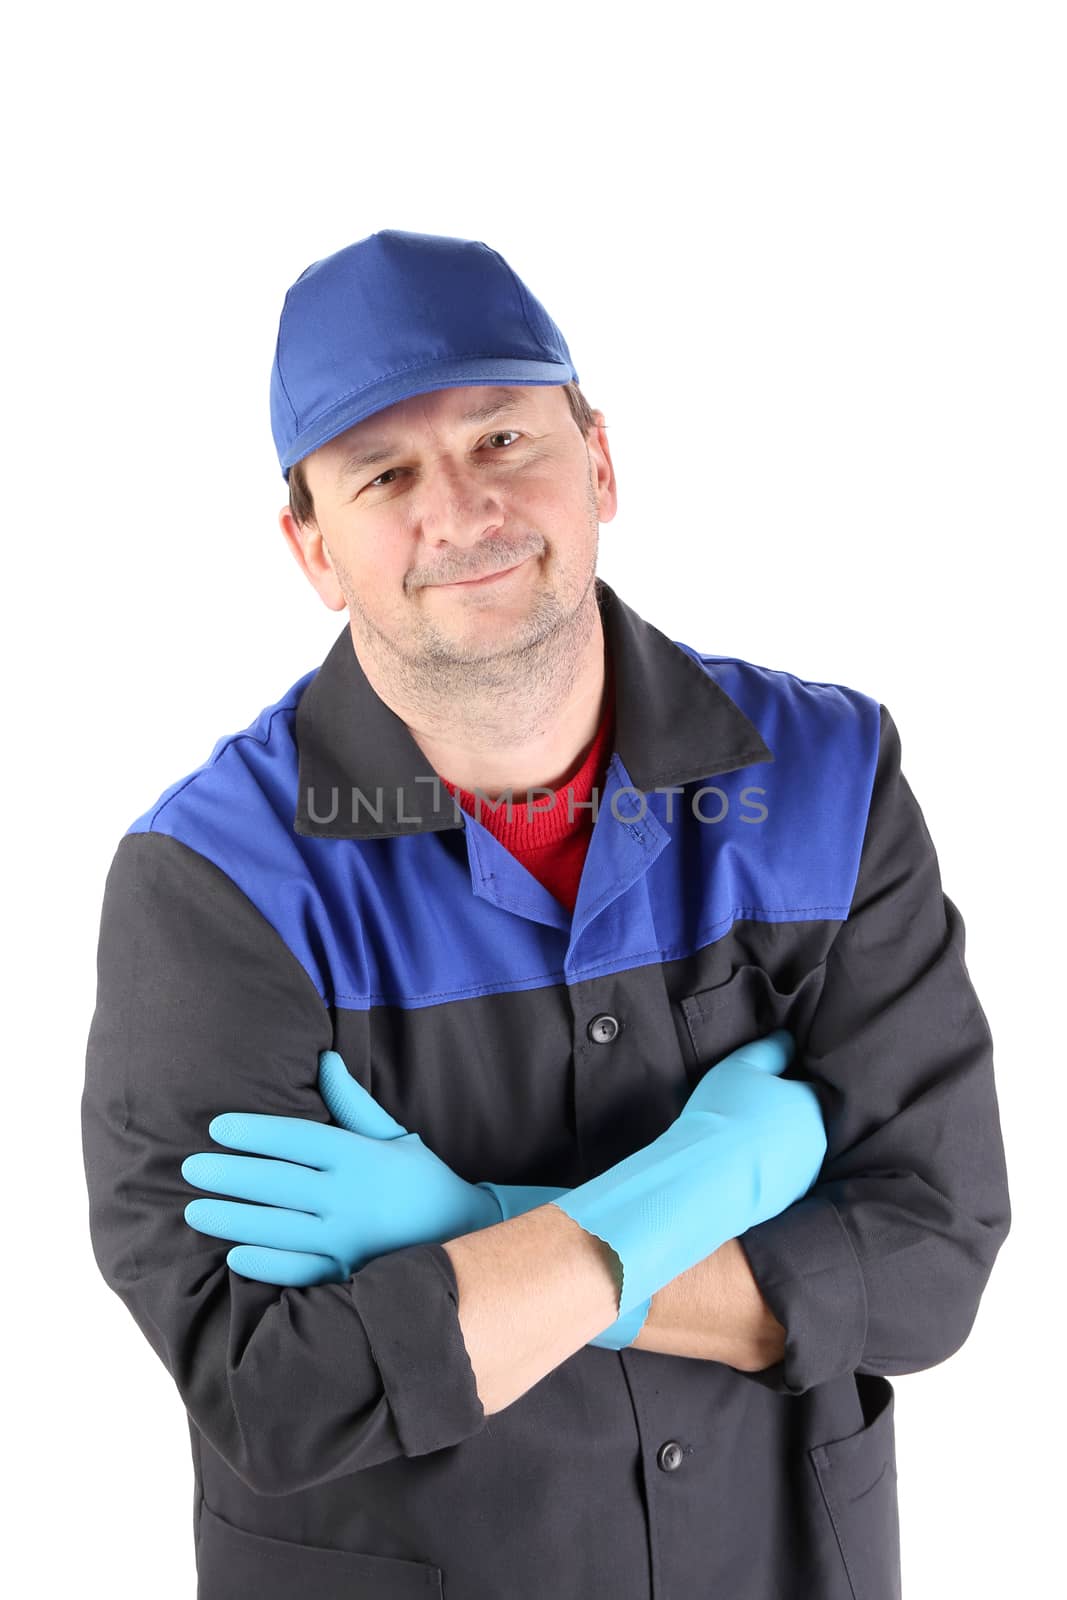 Working man smiling. Isolated on a white background.